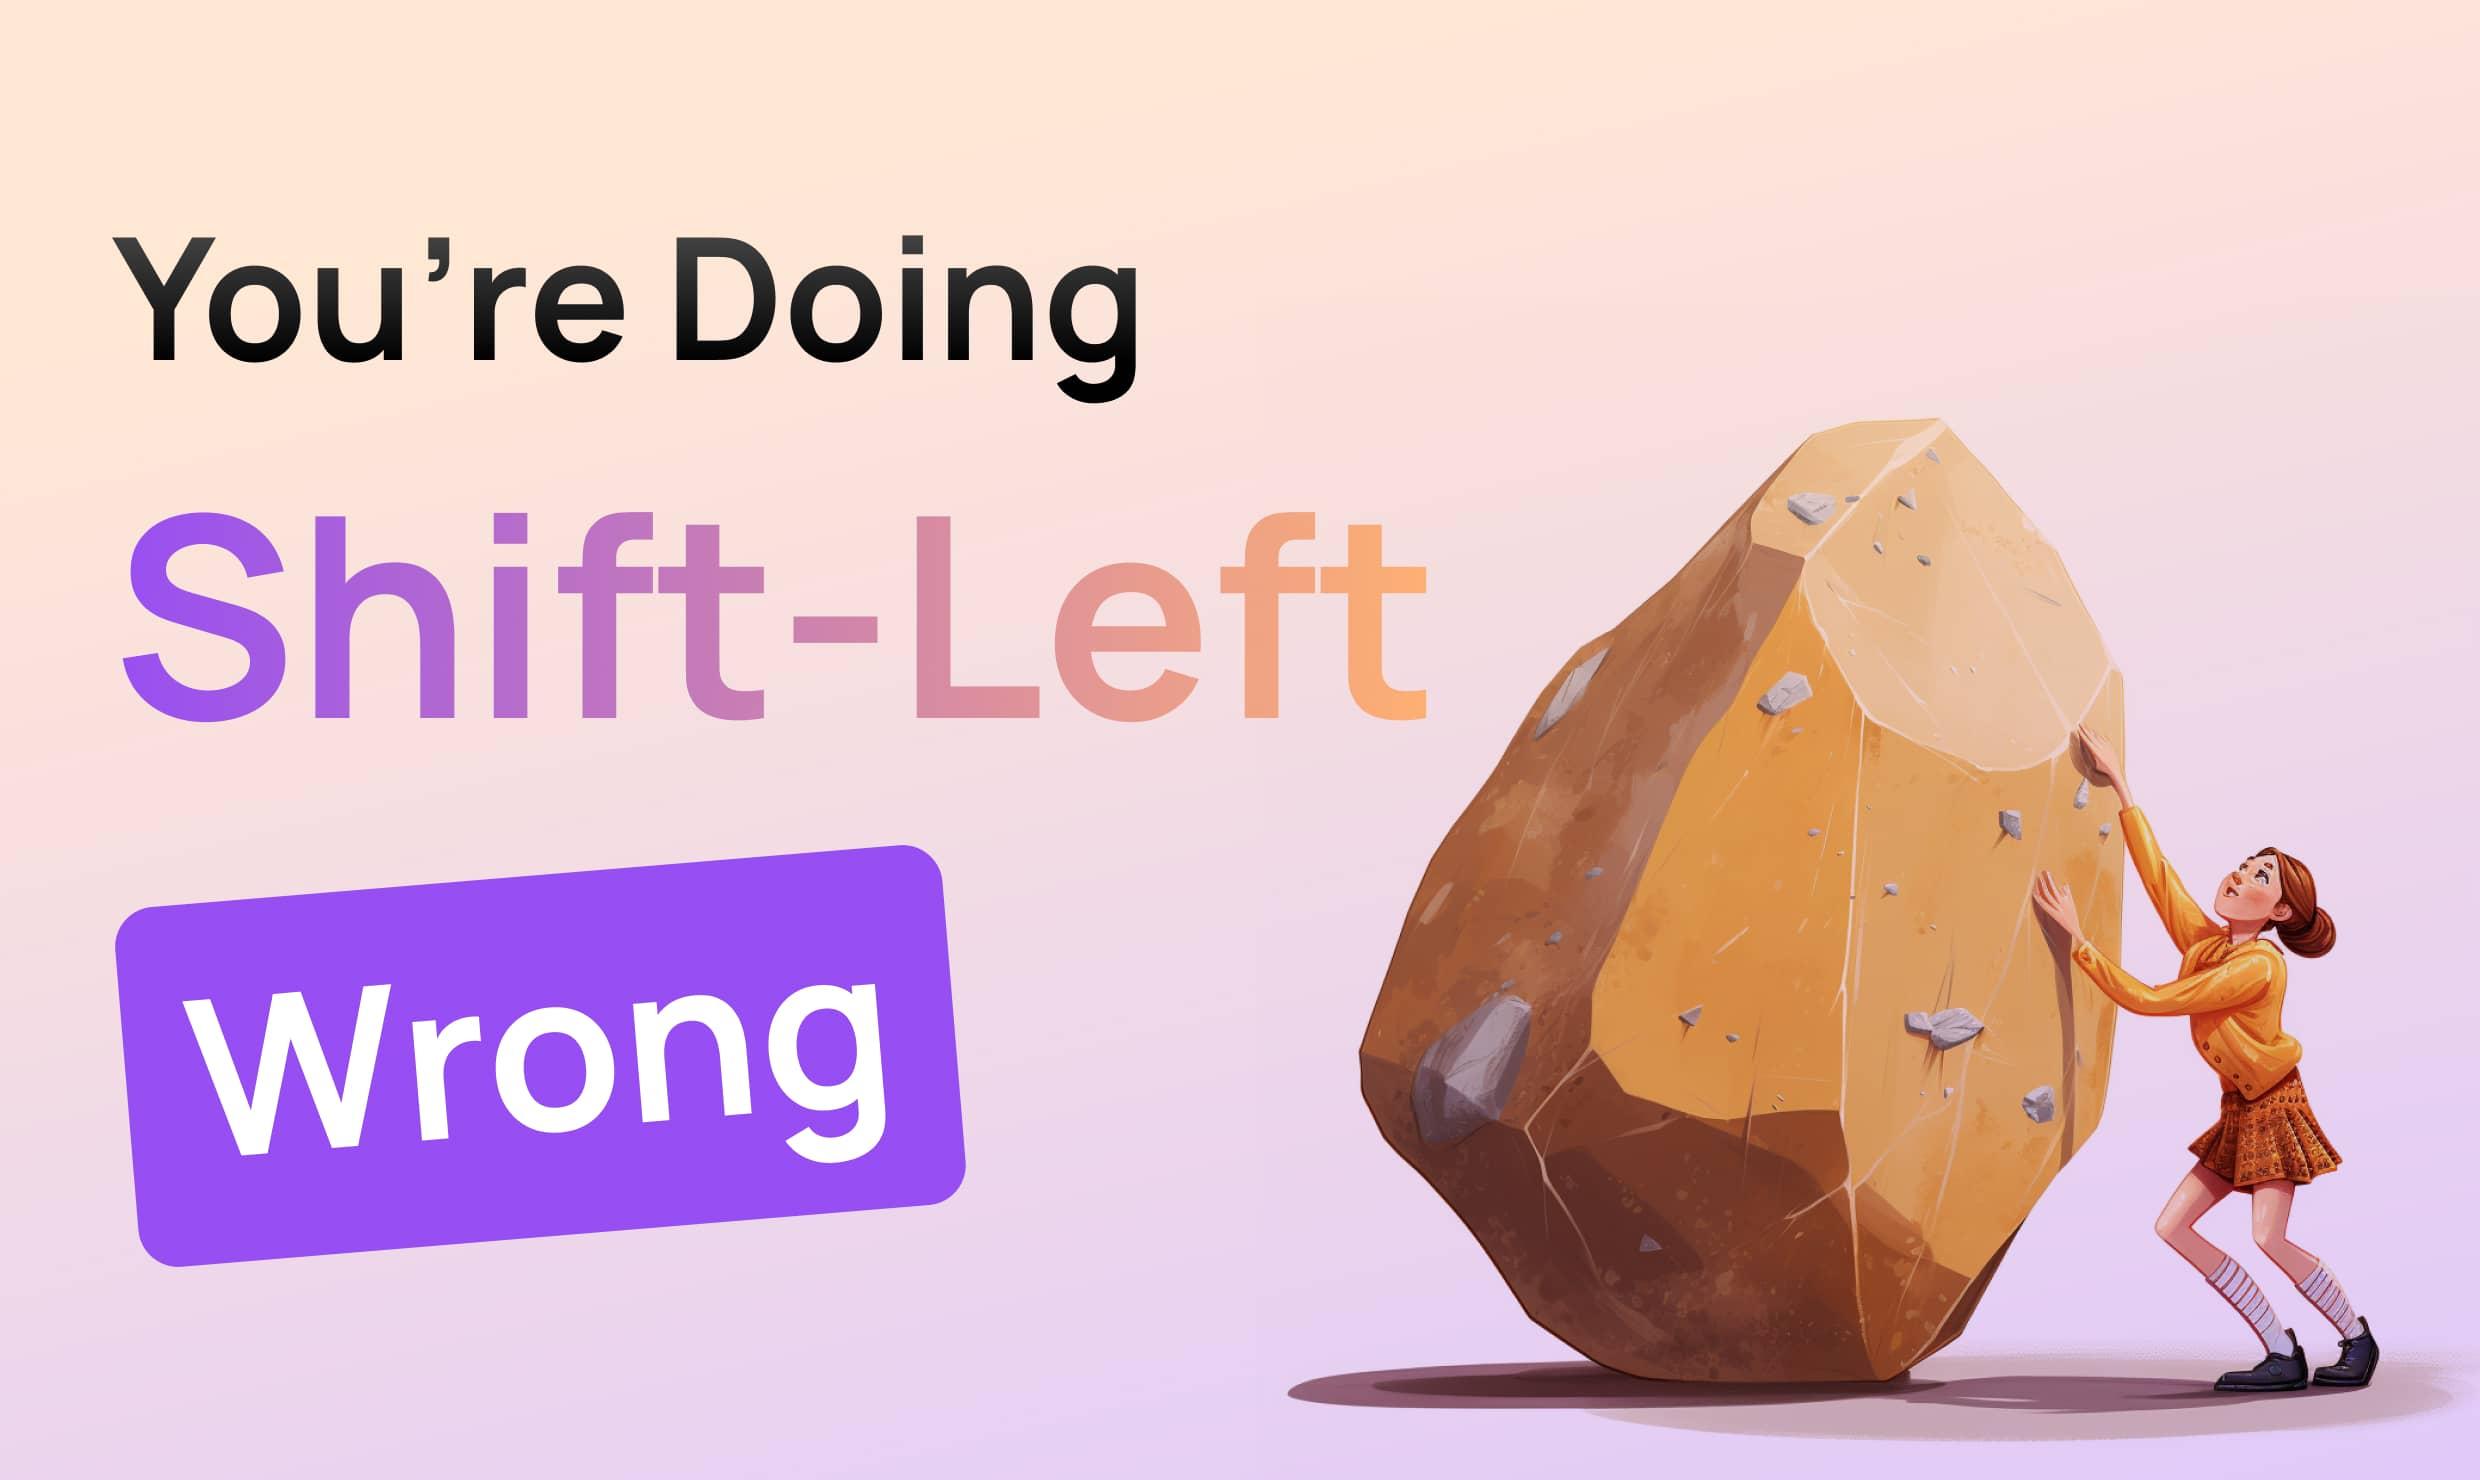 You're Doing Shift-Left Wrong